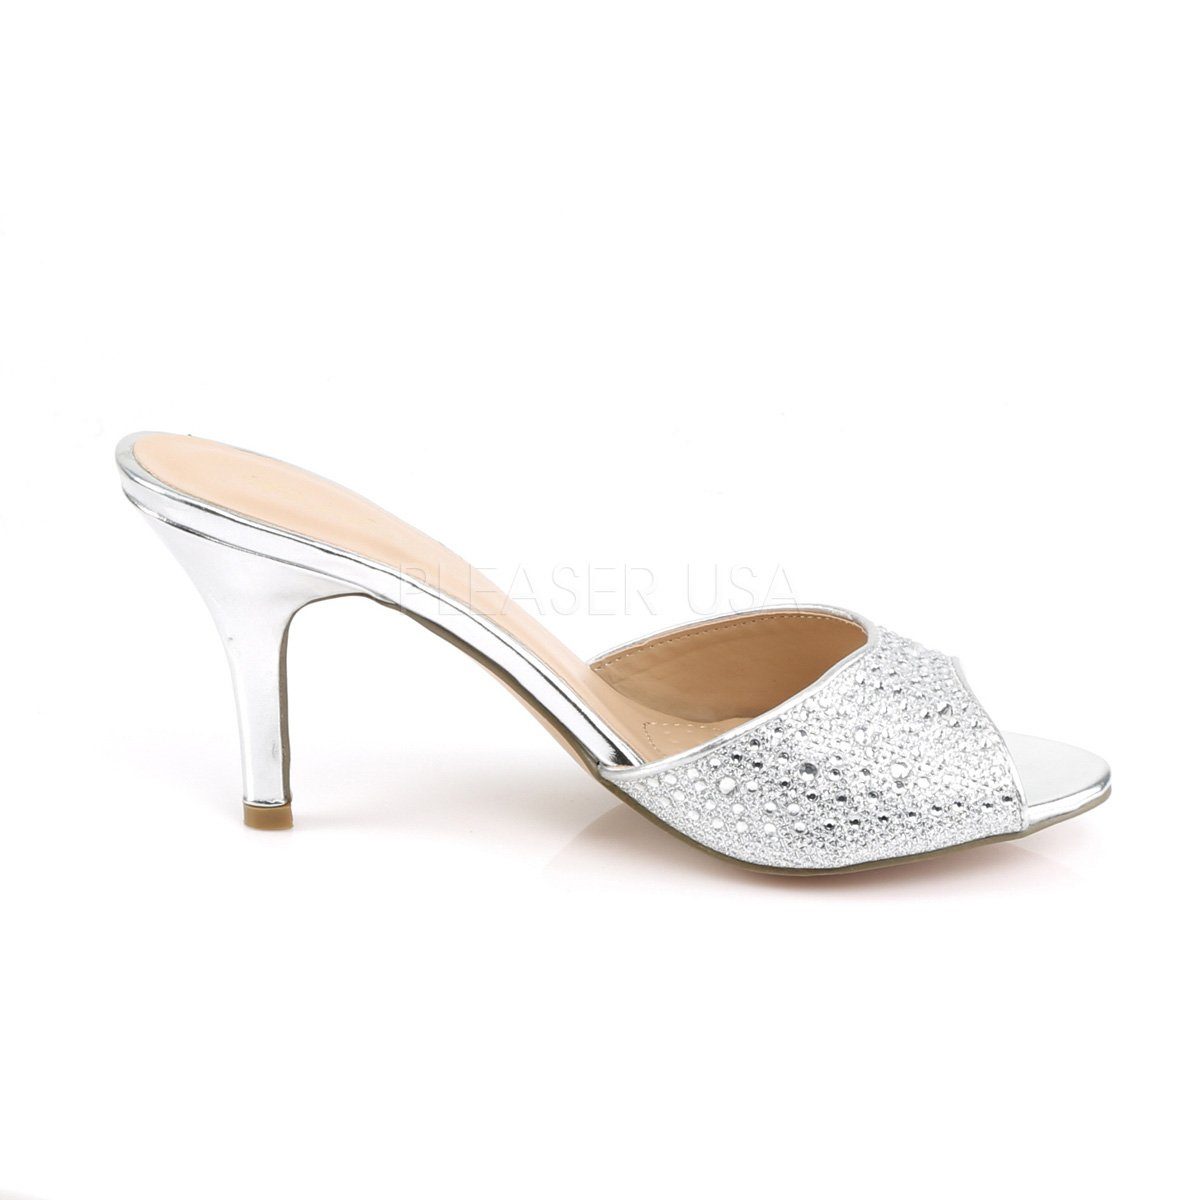 Pantolette High-Heel-Pumps - LUCY-01 Fabulicious Silber